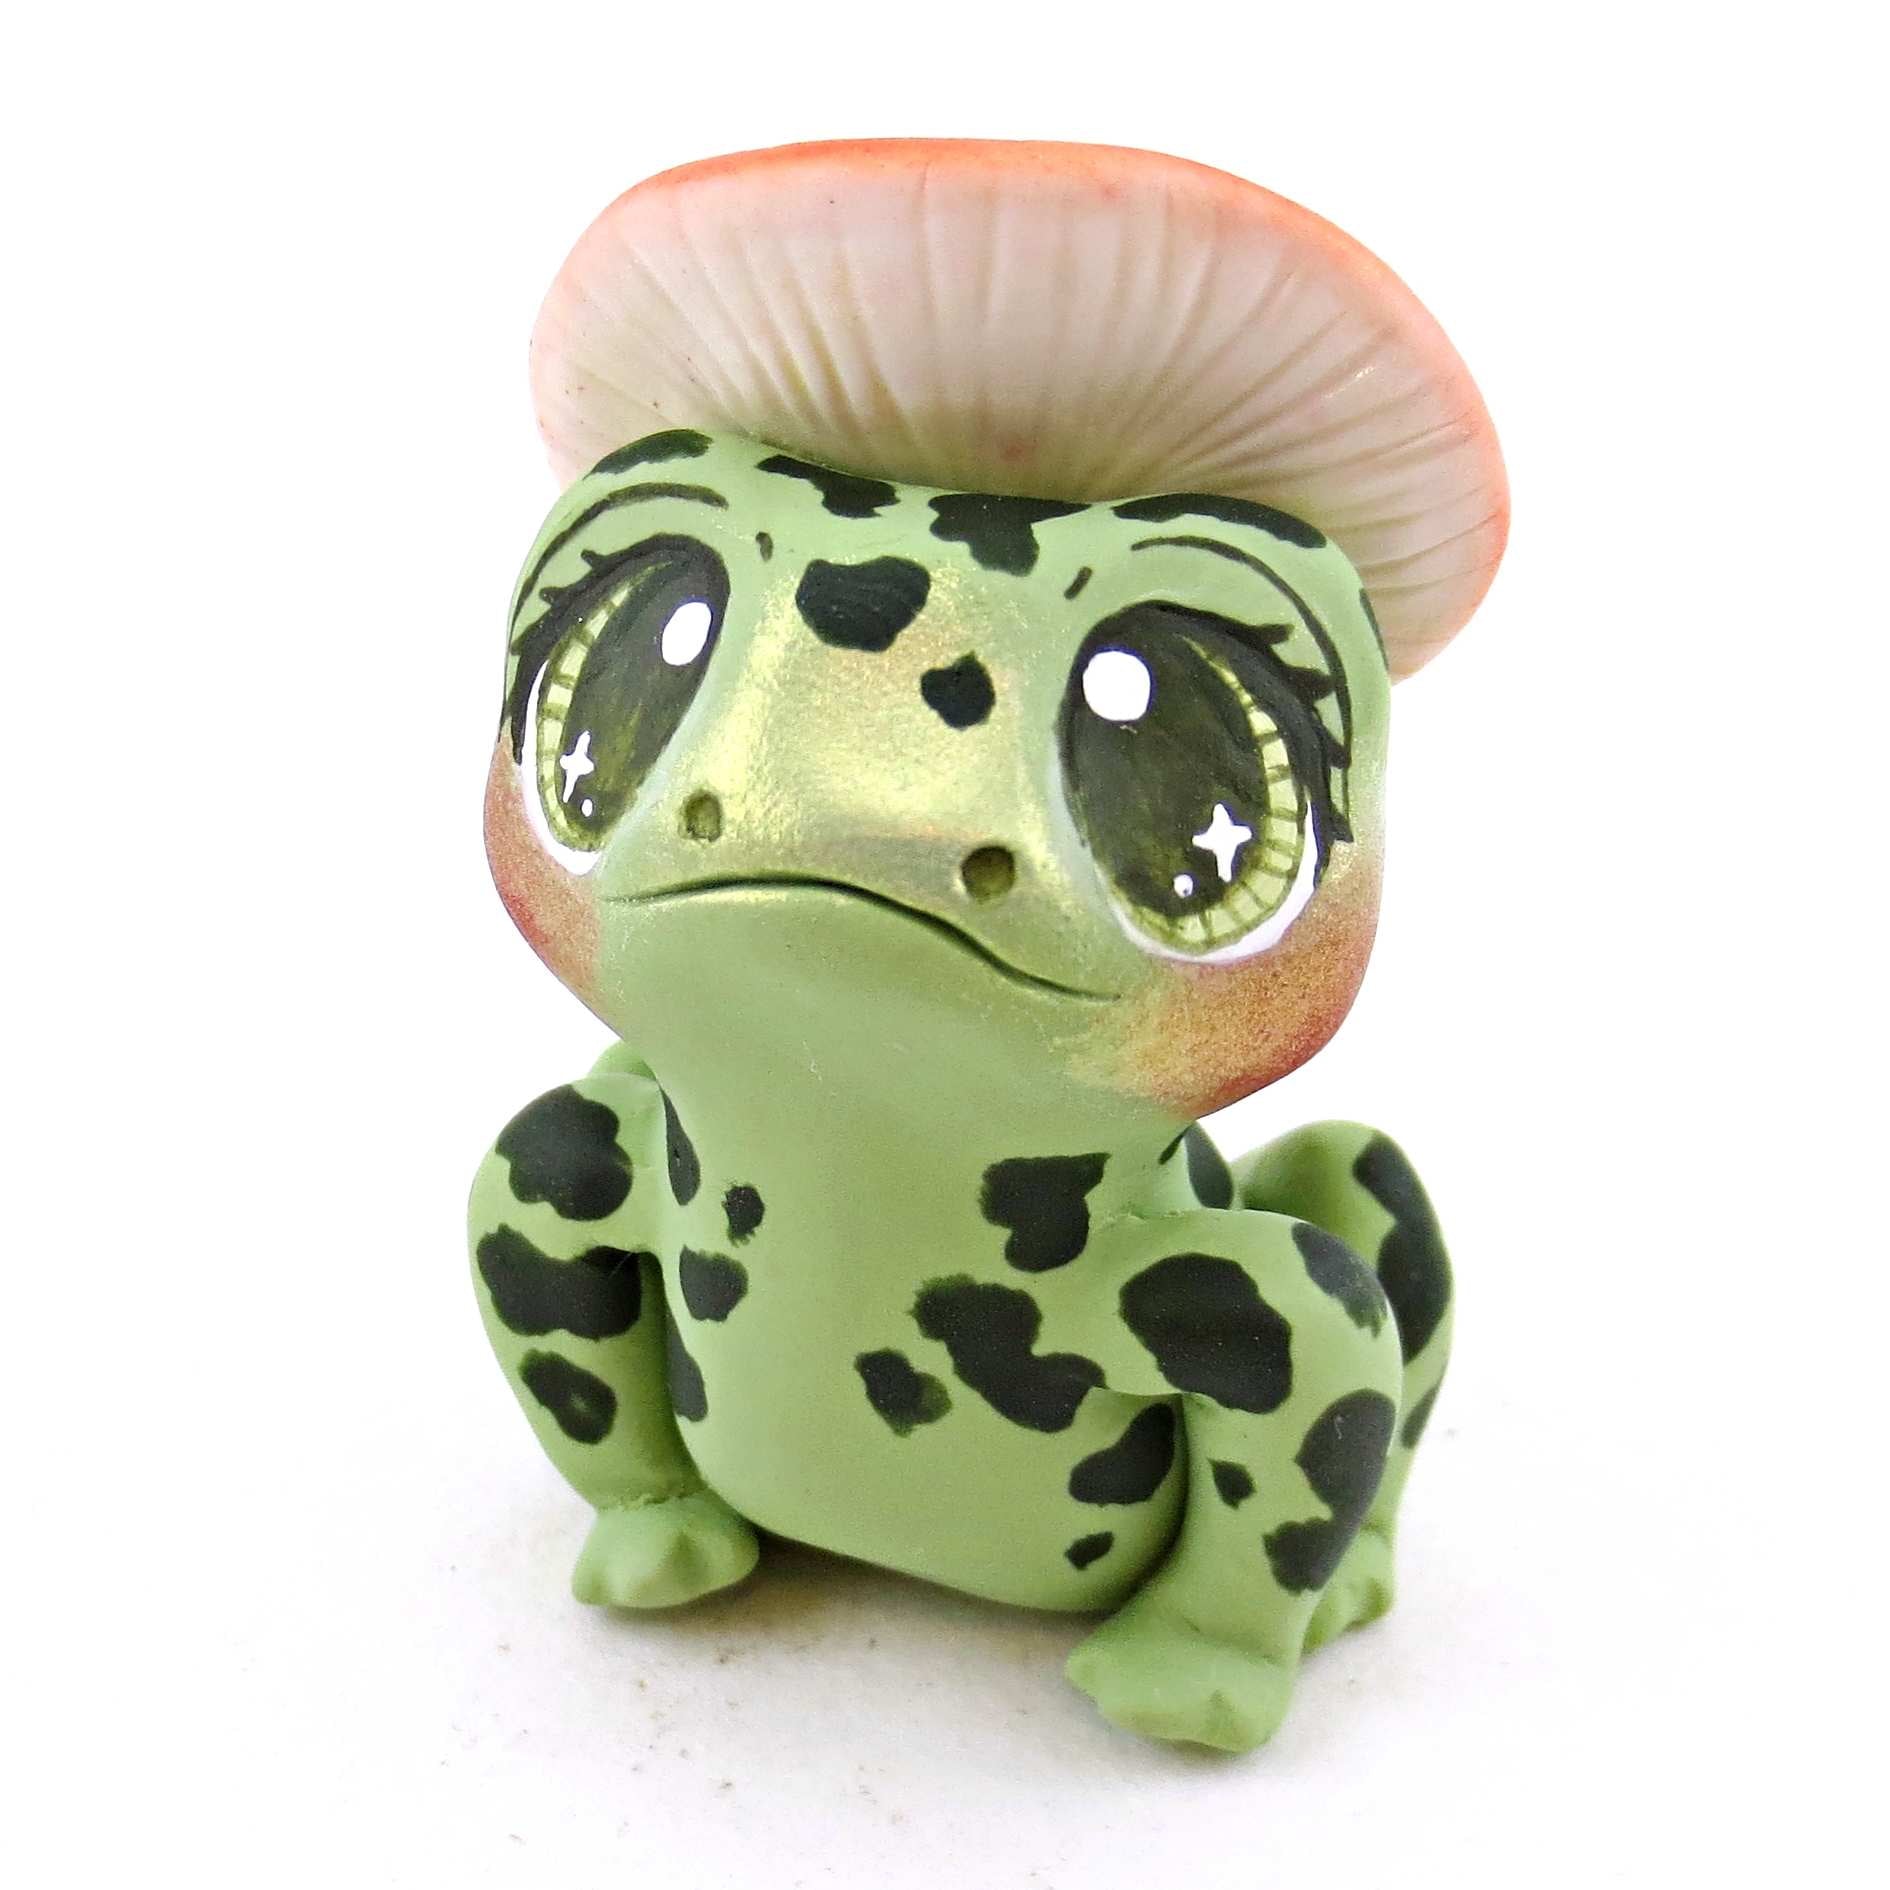 Mushroom Hat Frog Figurine - Polymer Clay Cottagecore Fall Animal Collection